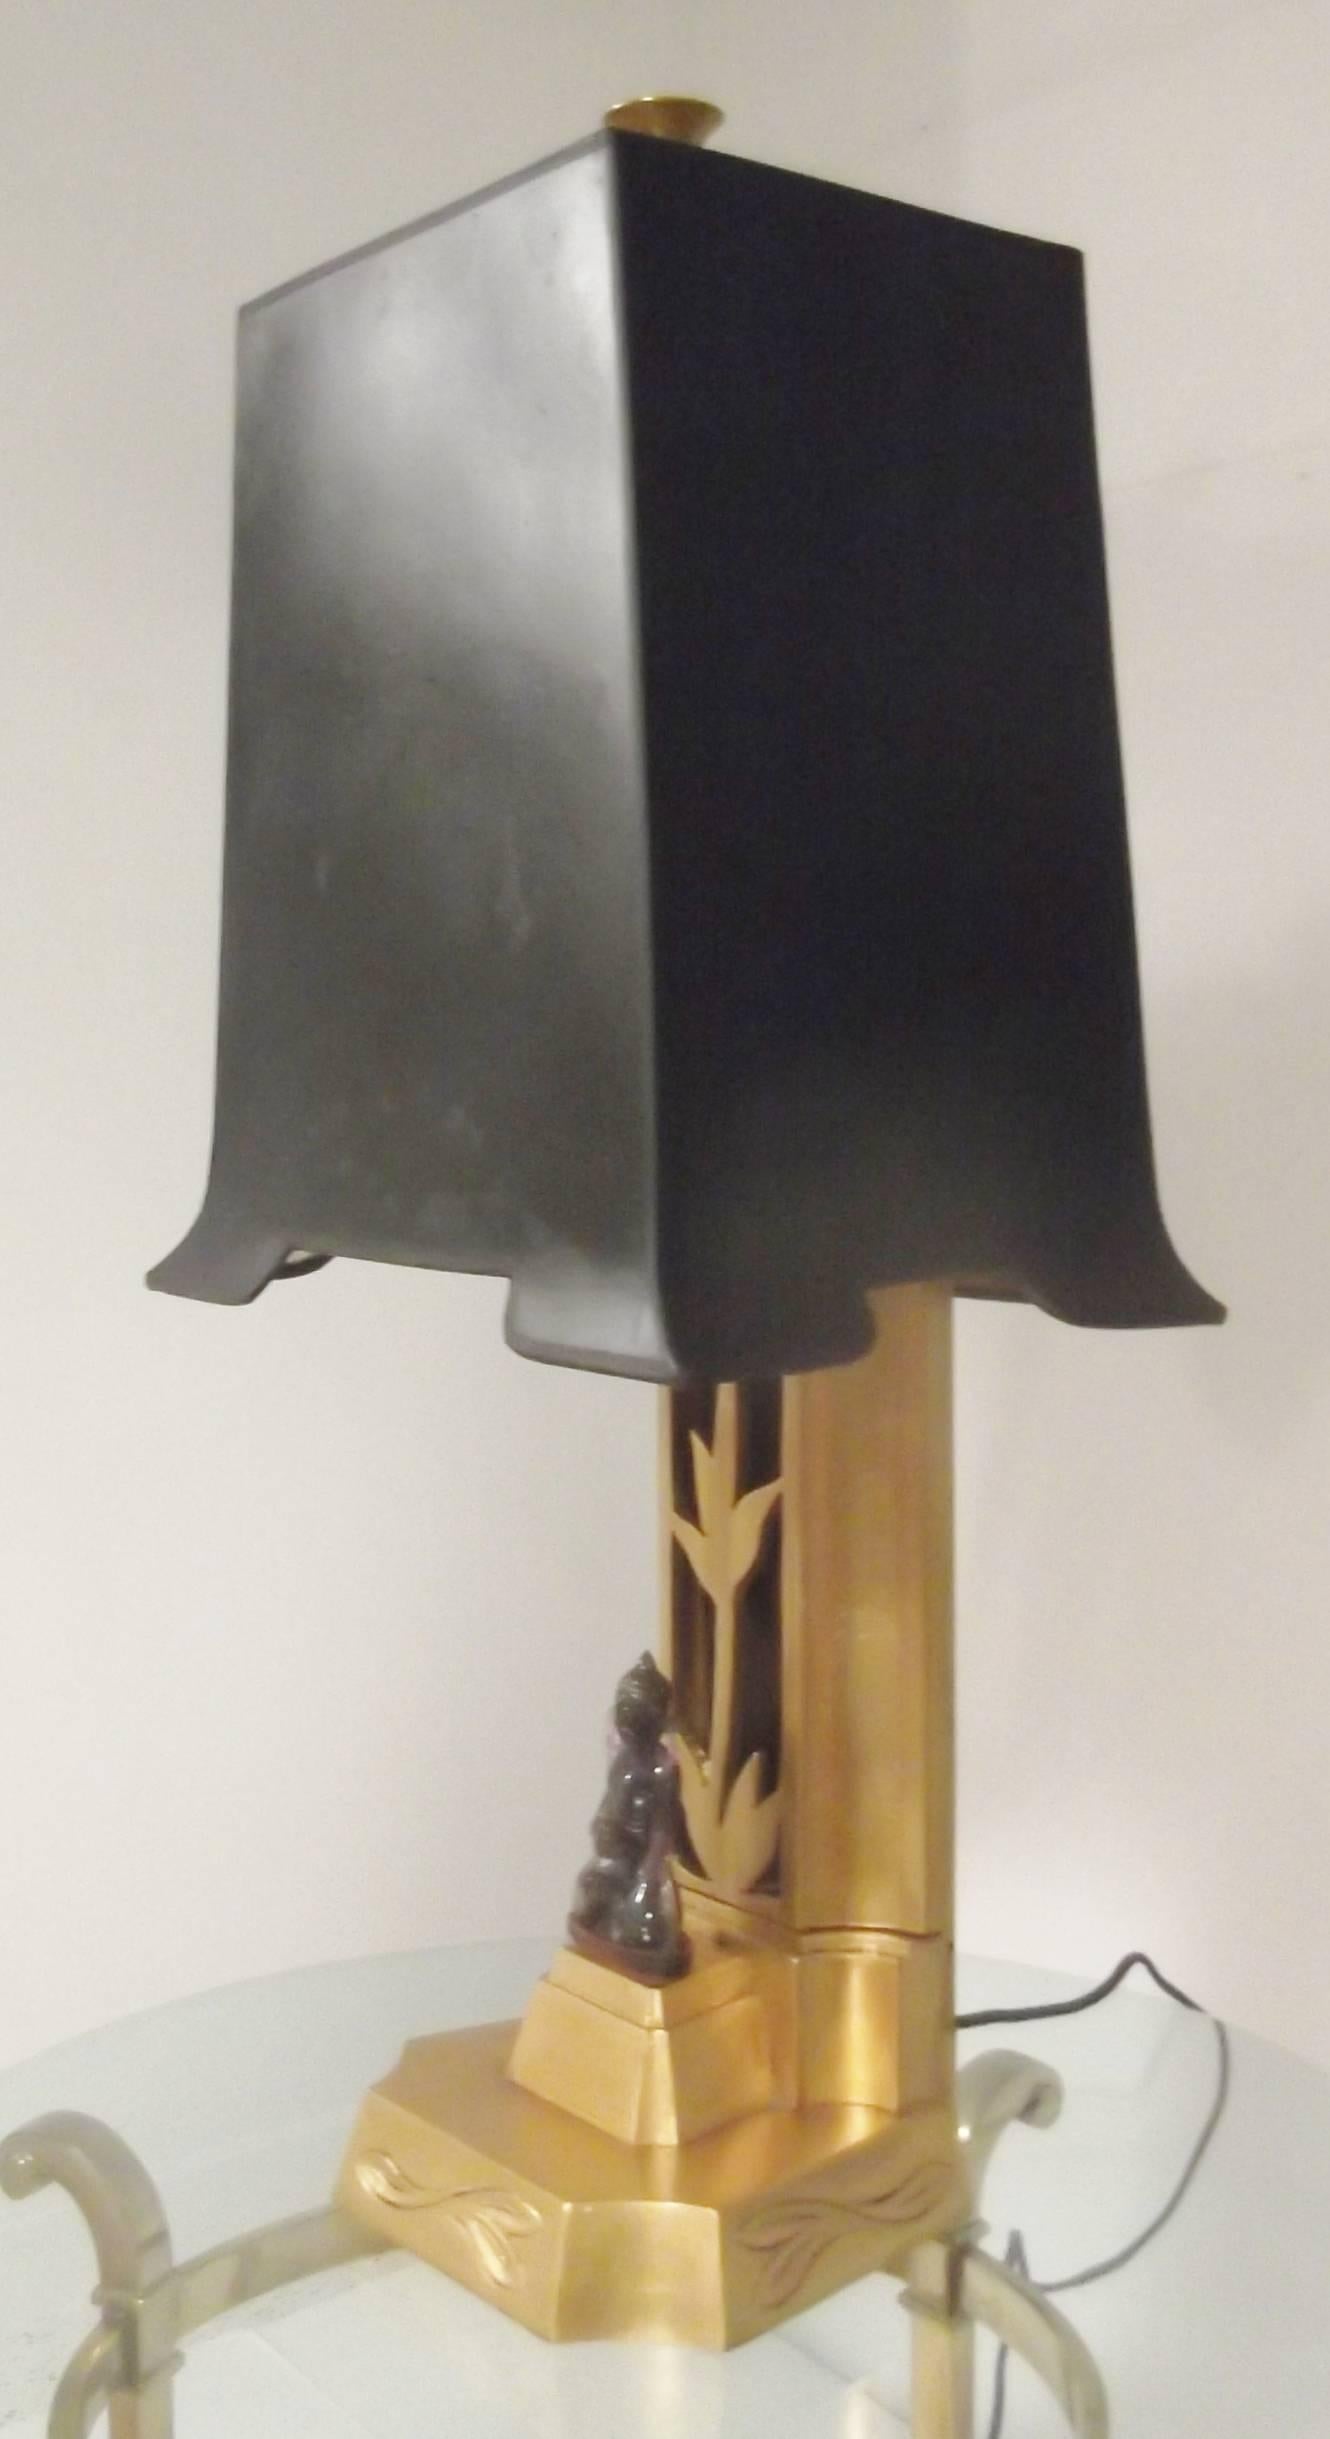 Rare and impeccably styled James Mont lamp with original black pagoda shade. The shade is a mat black with a gold foil lining.

The feature design element is the carved purple quartz Buddha with a distressed mirrored back drop. The flared finial